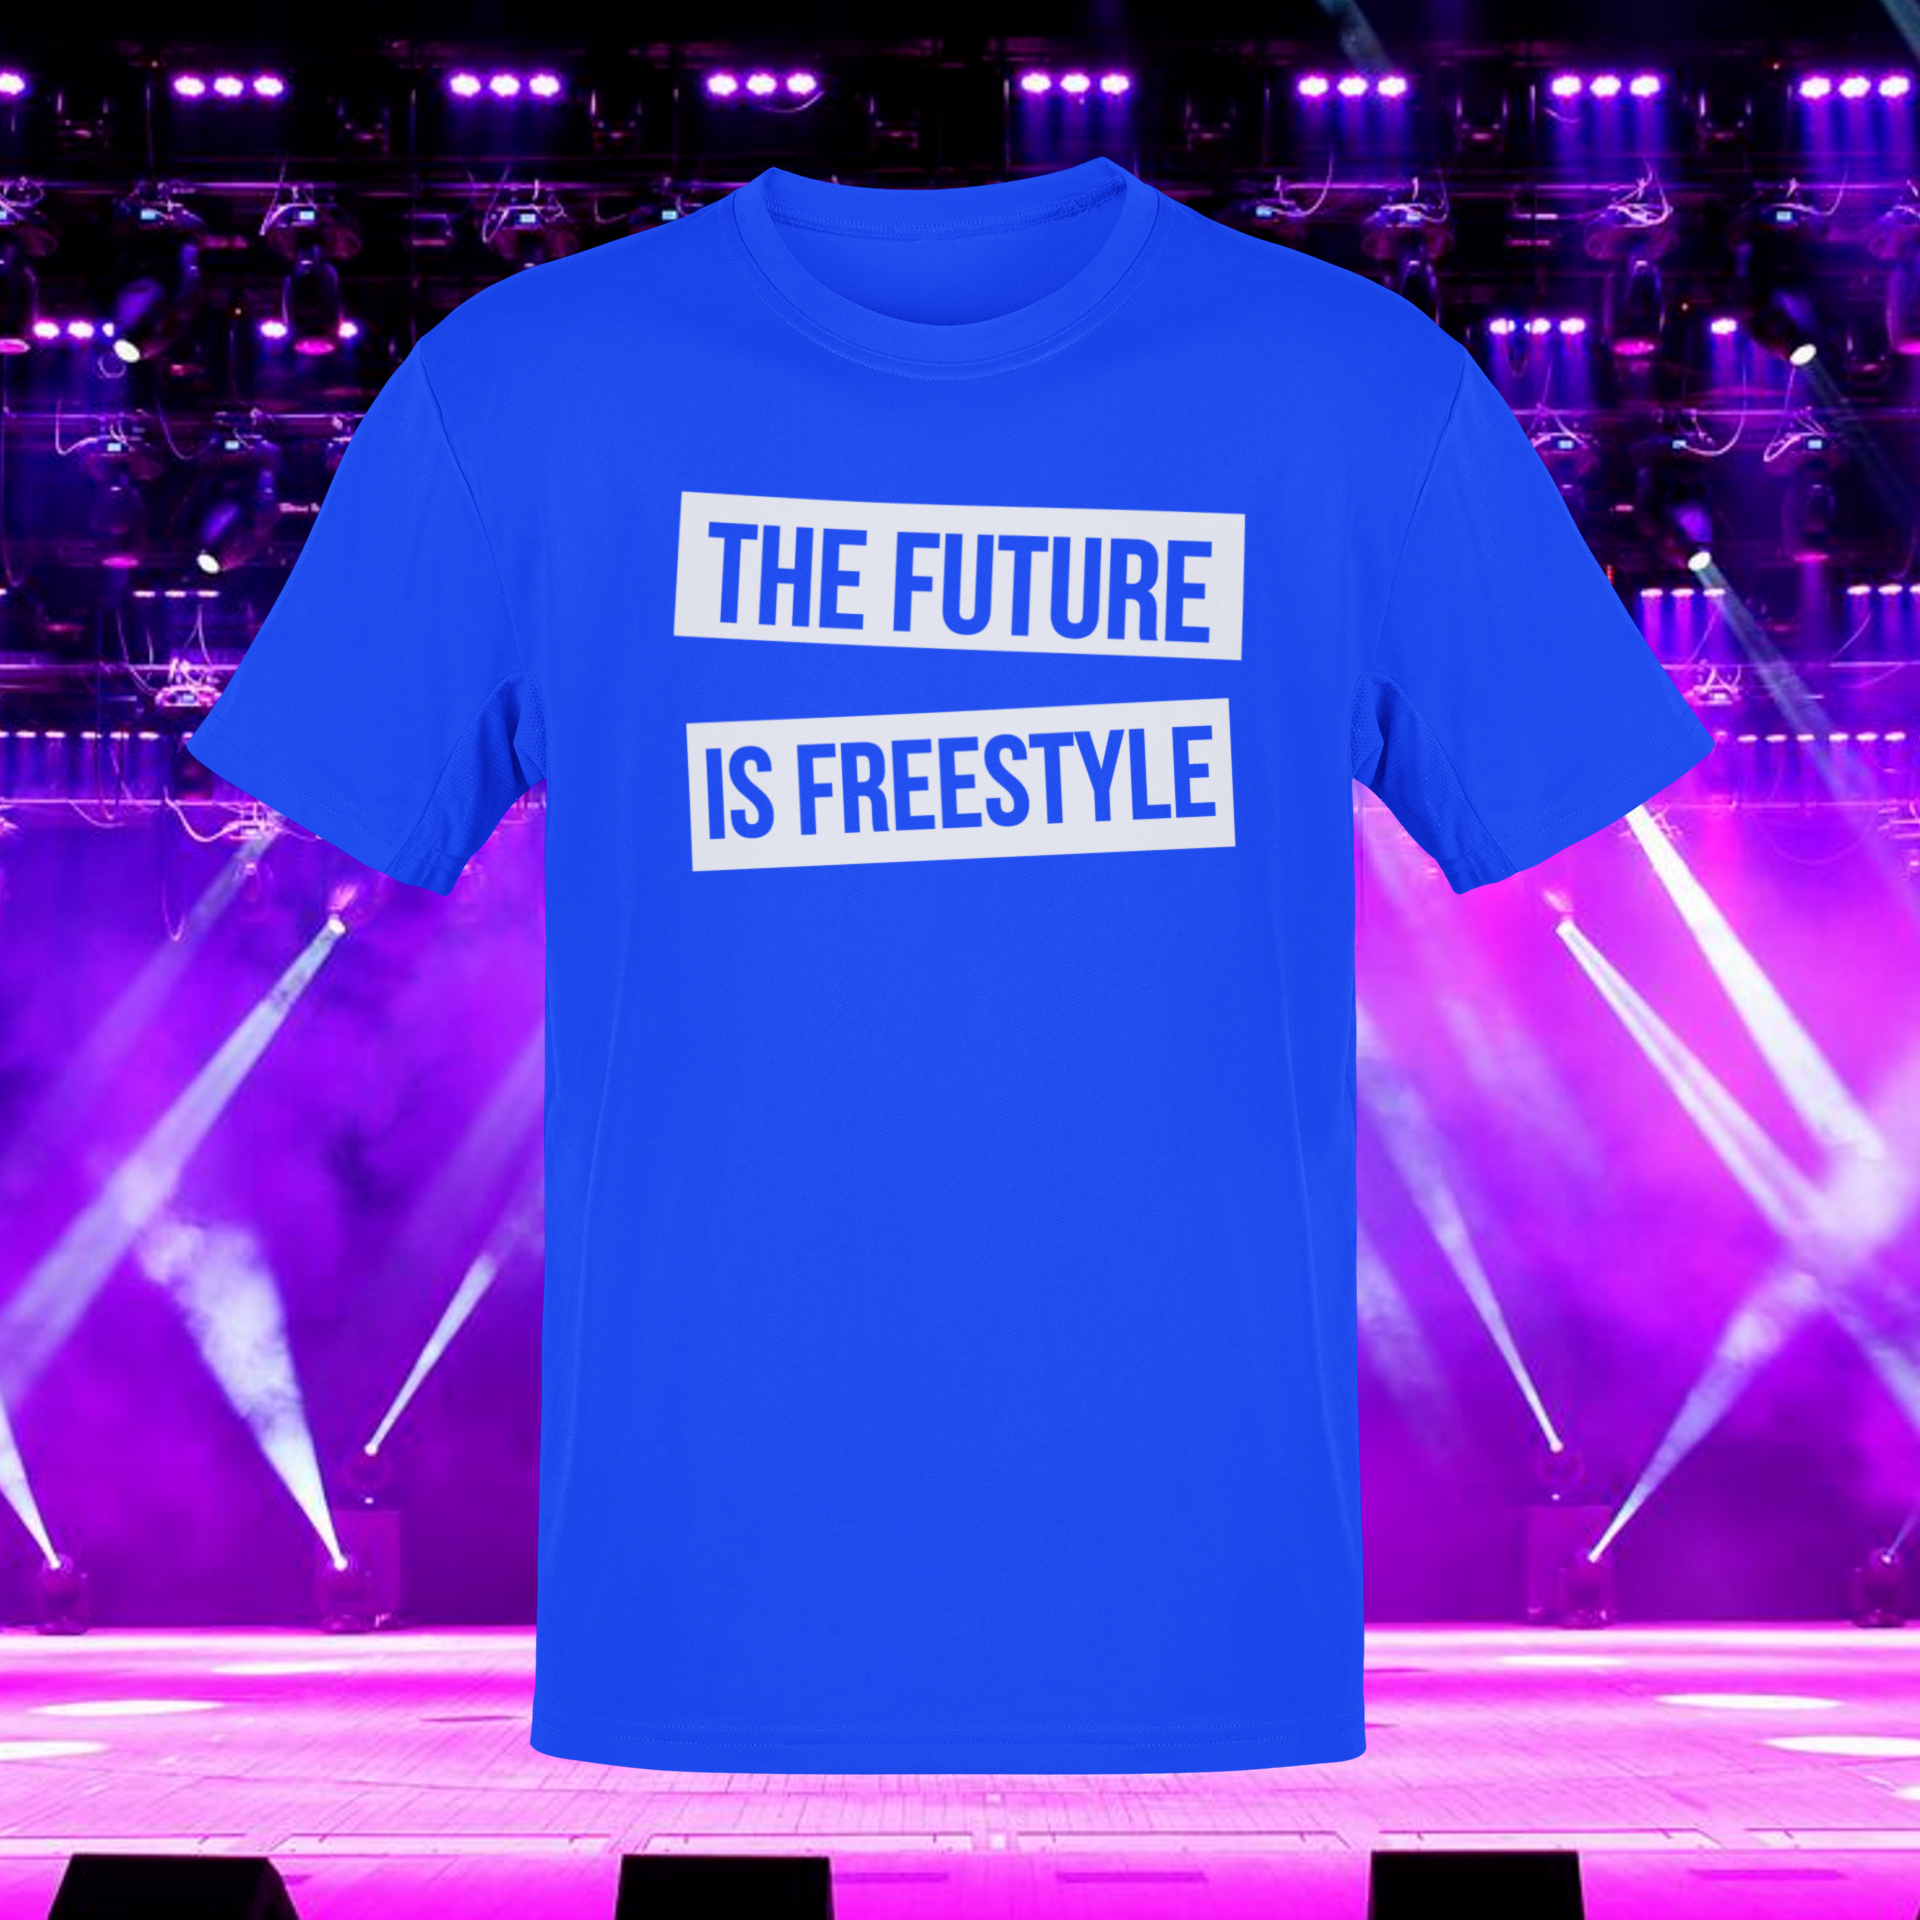 Brought to you by "TONY TKA” Freestyle Future Logo Tee.